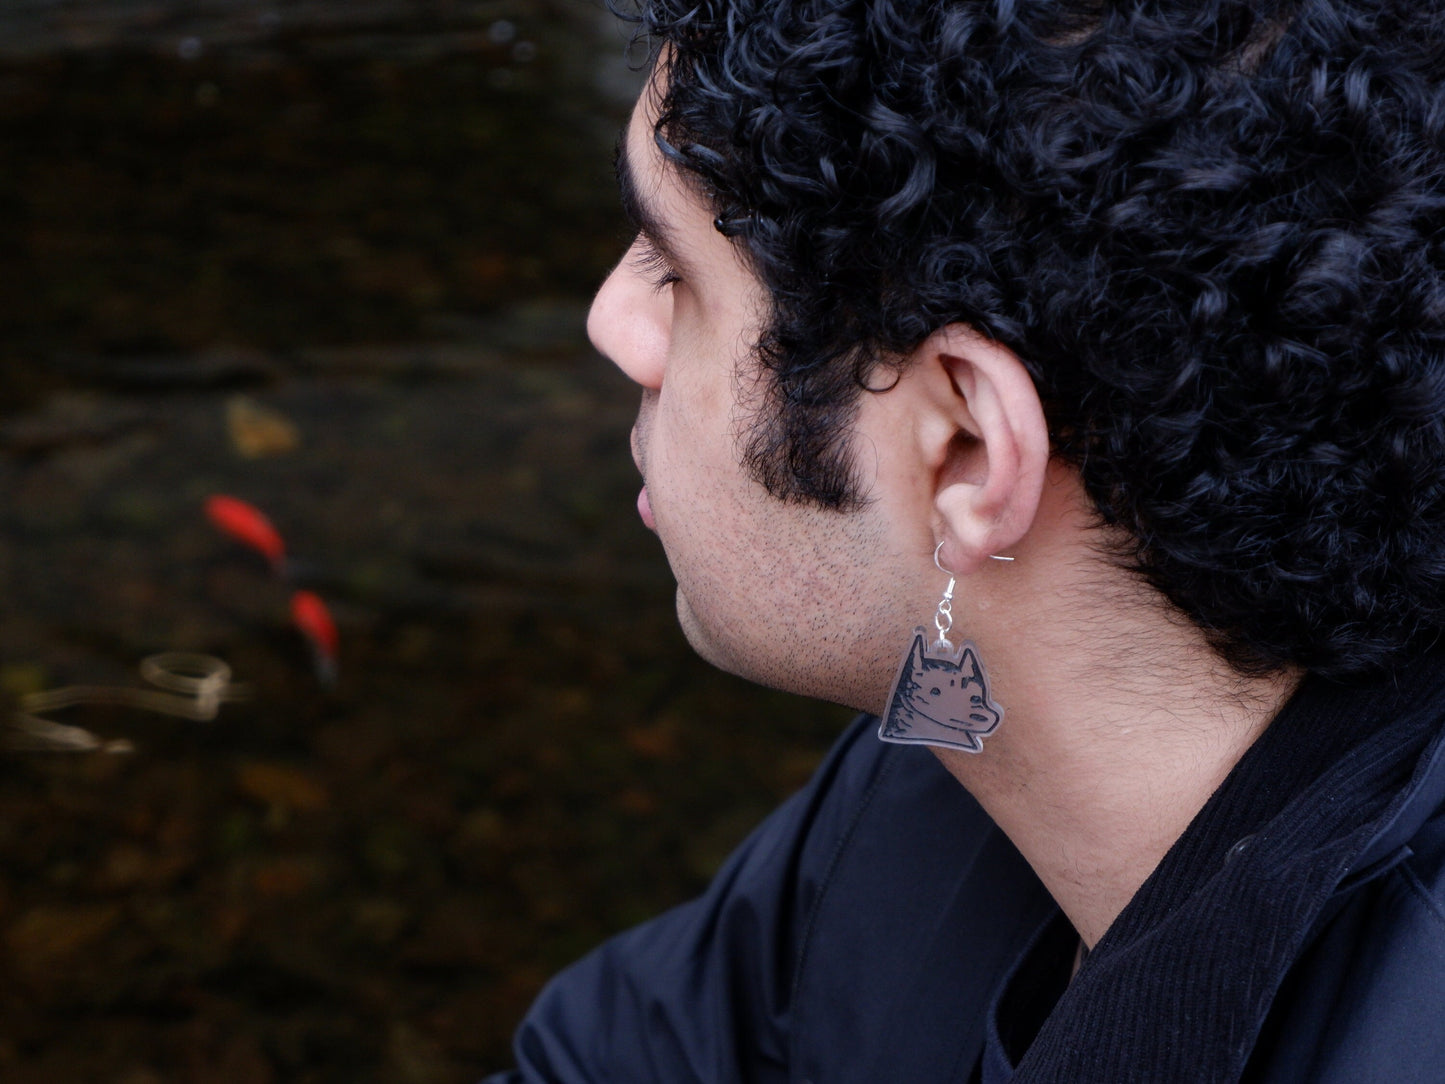 dog earrings being worn by a man by a pond